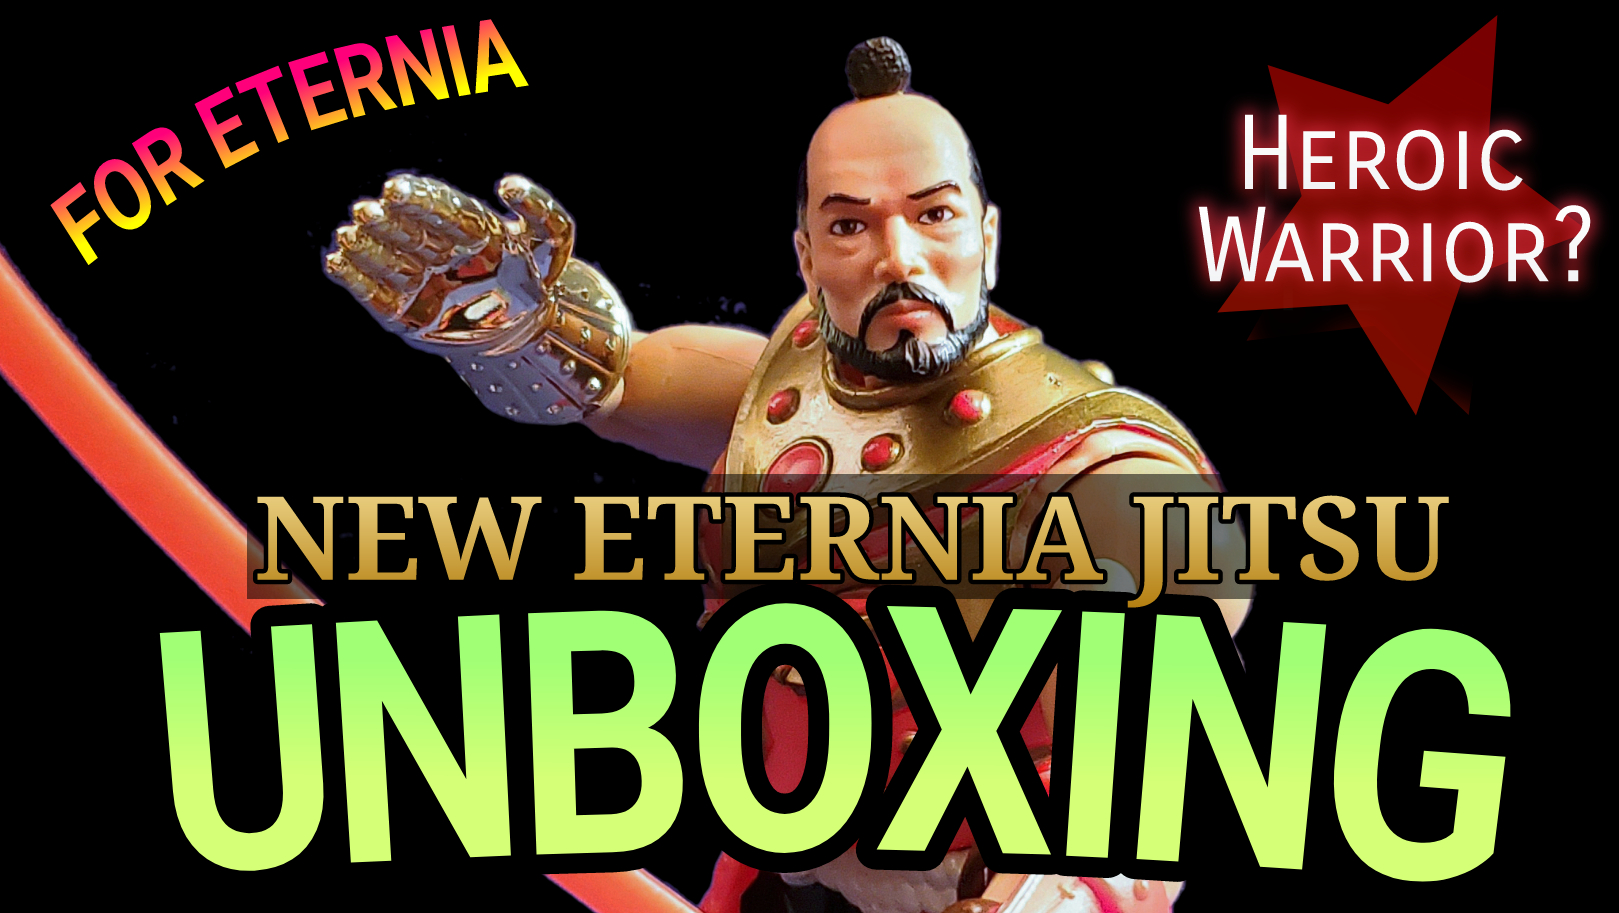 Watch our Masterverse New Eternia Jitsu Unboxing, Lore & Mini Review